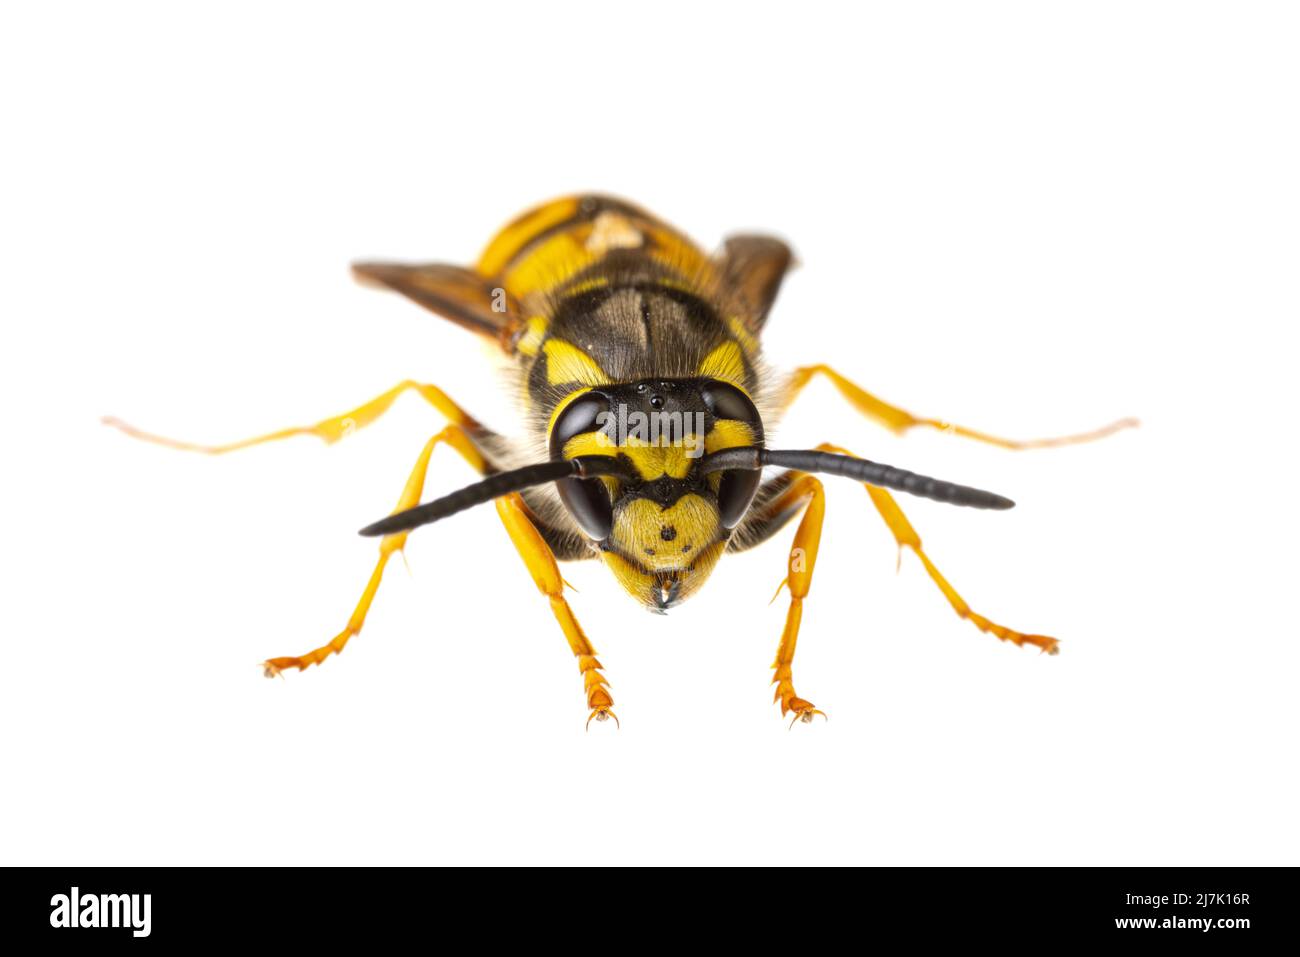 insects of europe - wasps: macro of Vespula germanica  german wasp european wasp  isolated on white background  front view Stock Photo